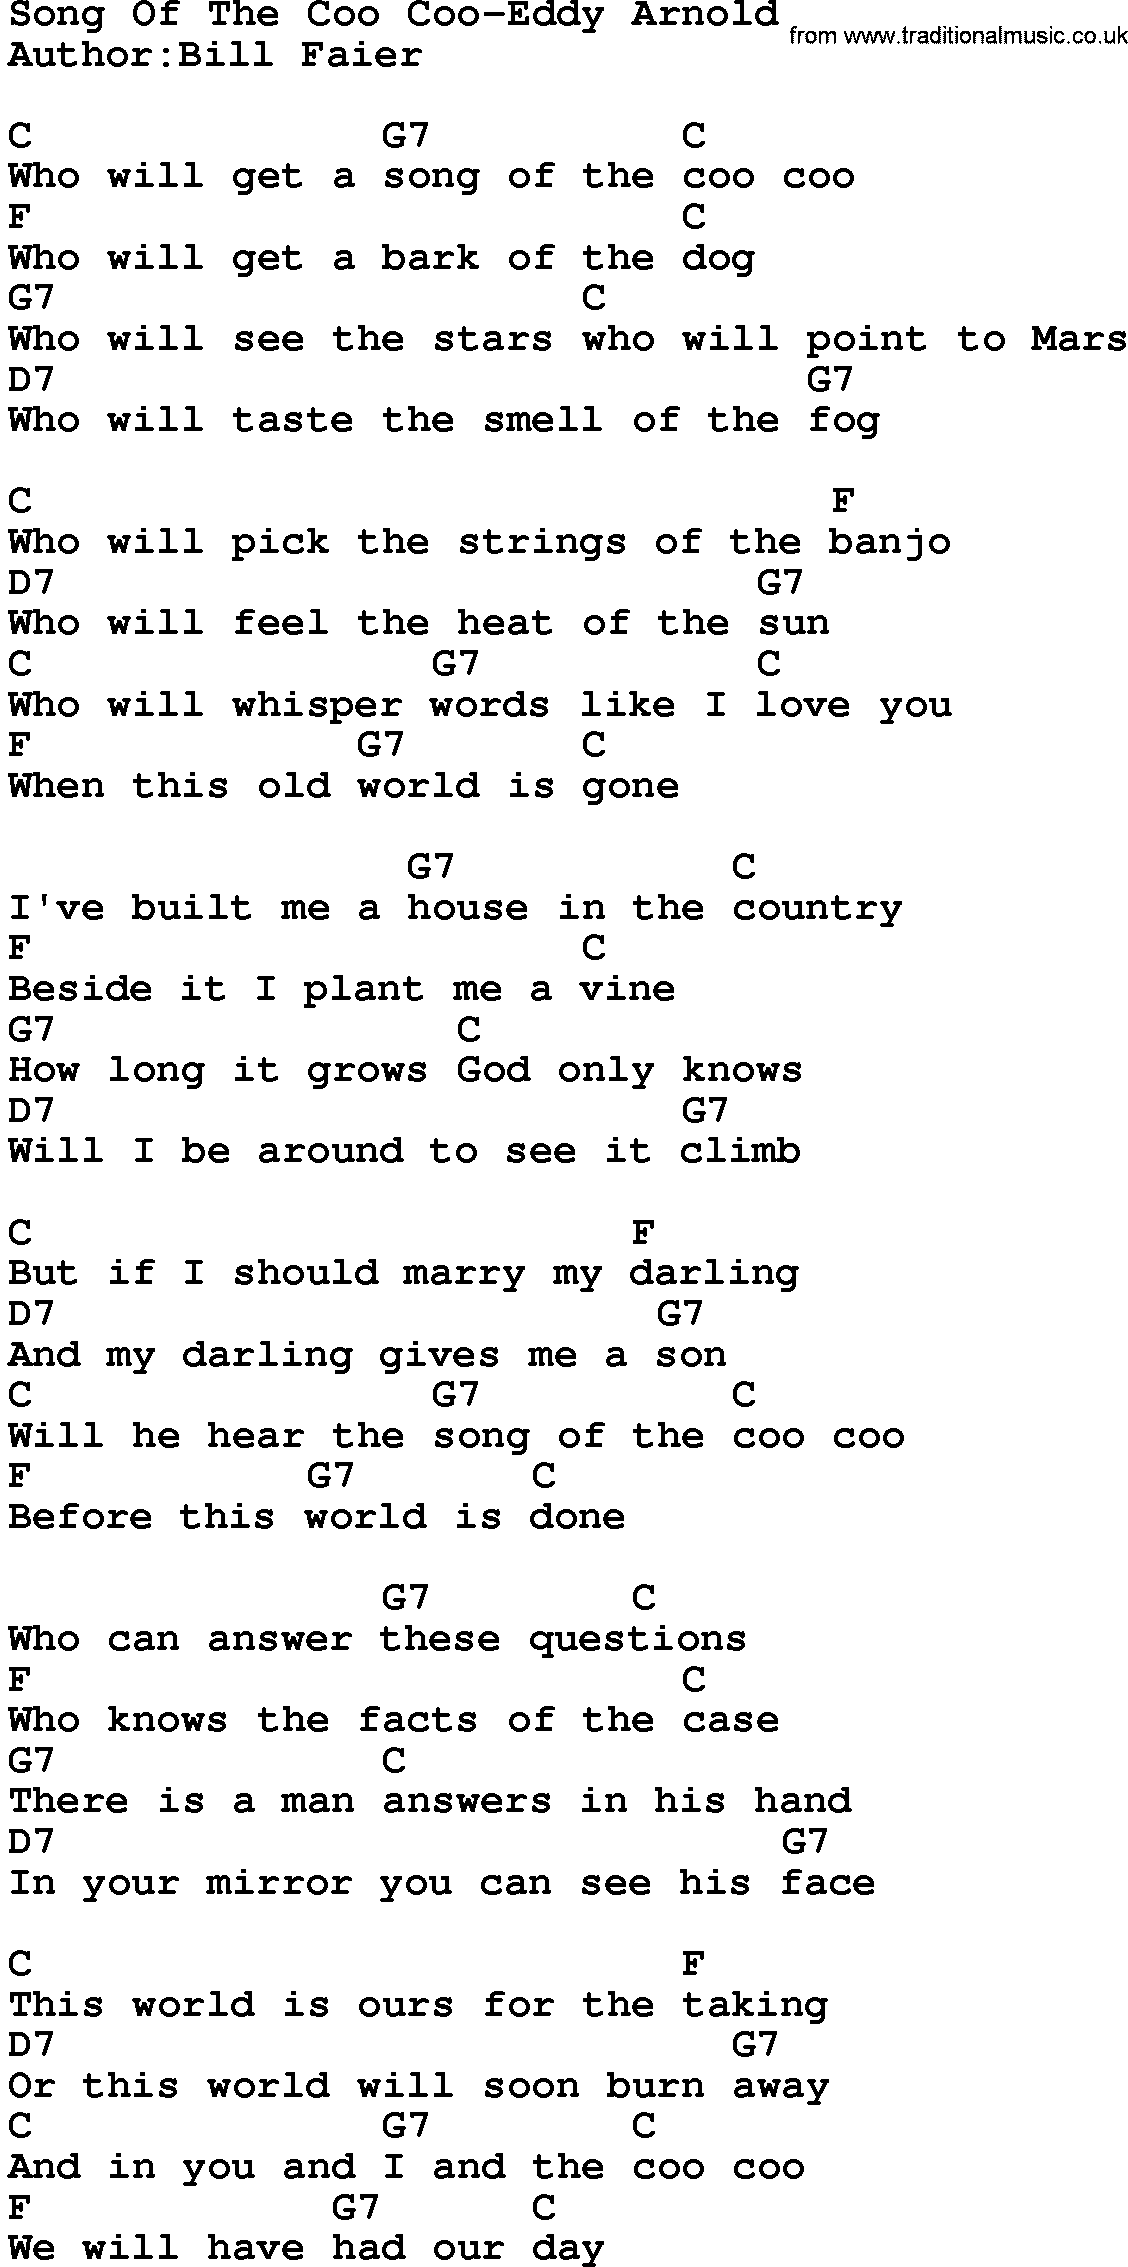 Country music song: Song Of The Coo Coo-Eddy Arnold lyrics and chords